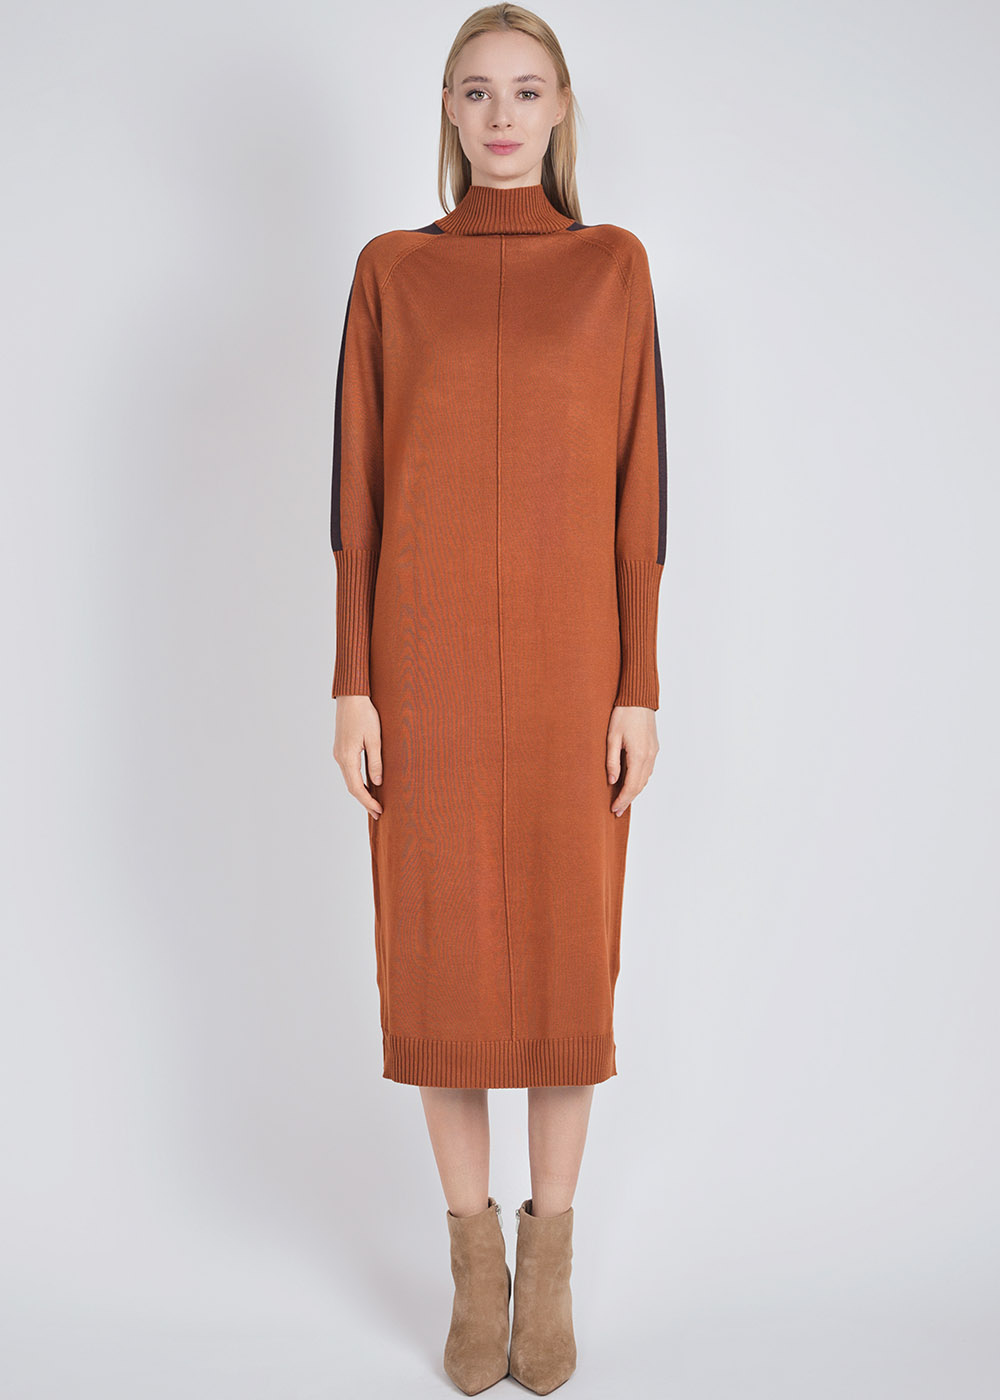 Sophisticated Rust Dress: High Neck & Striped Arms